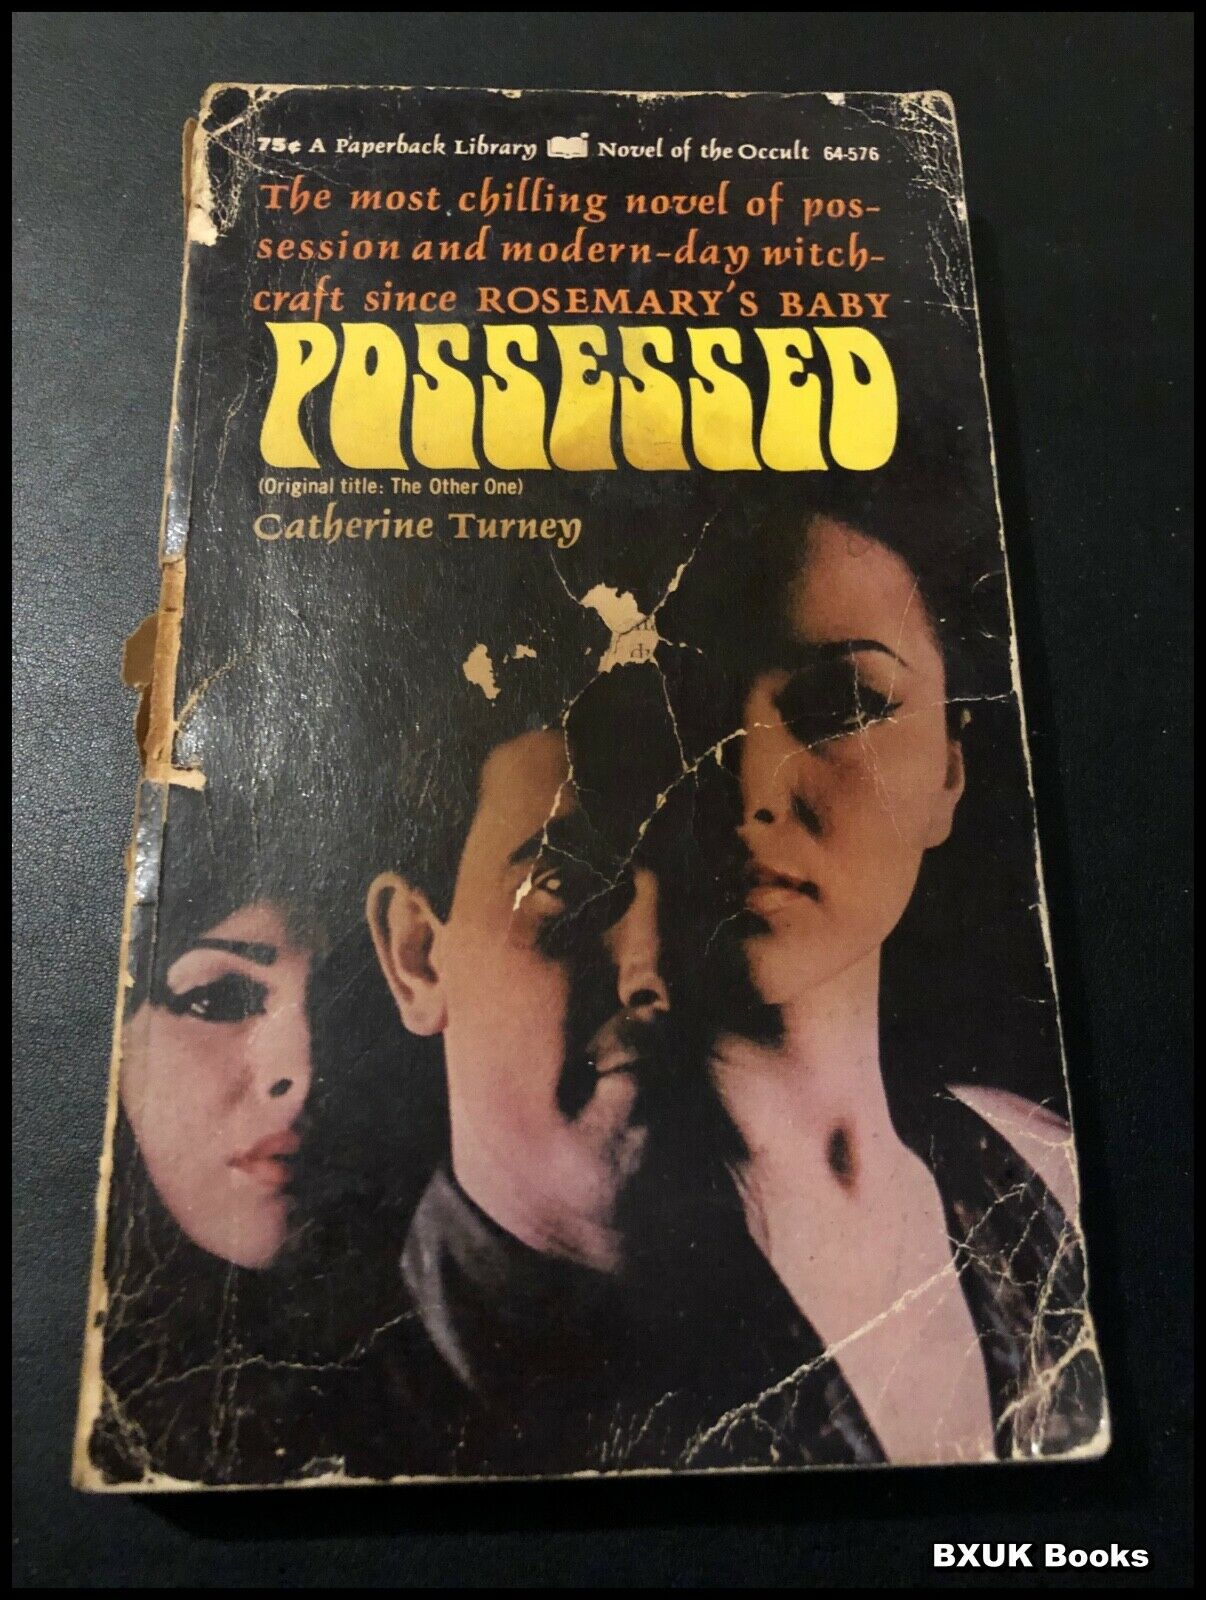 Possessed by Cathrine Turney (Paperback 1971)